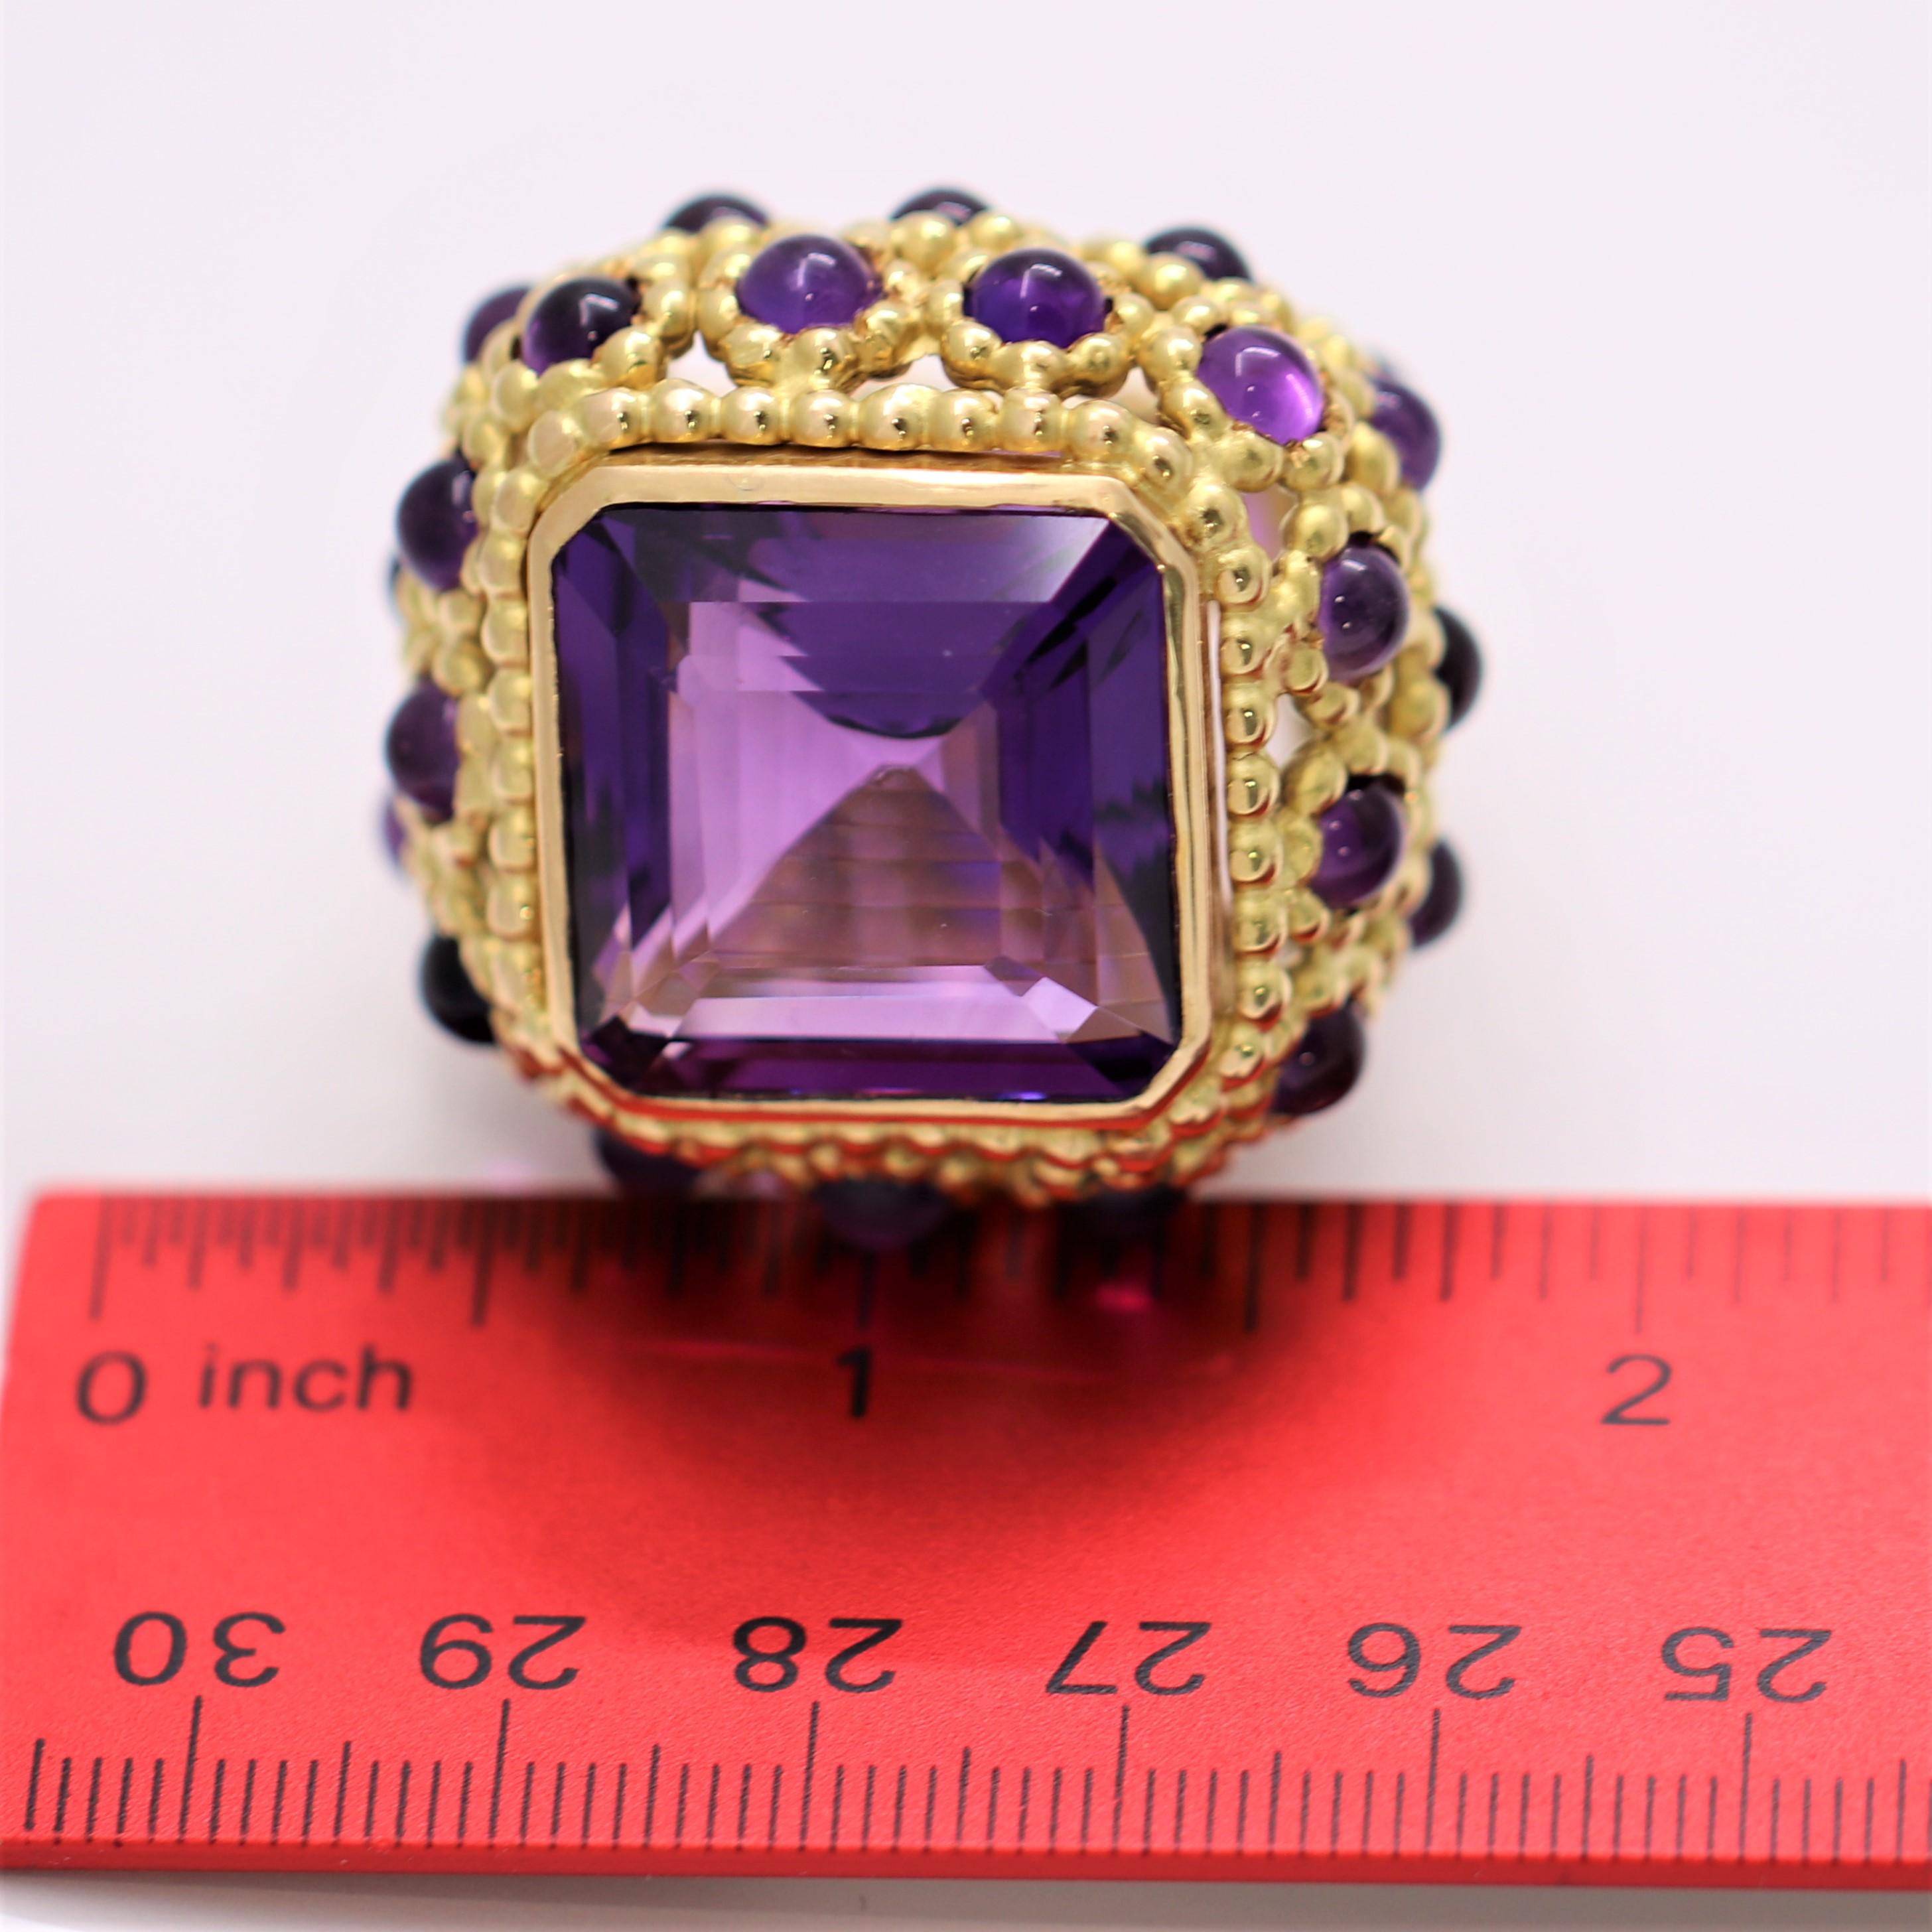 Elegant Grand Scale French Mid-20th Century 18k Gold and Amethyst Fashion Ring For Sale 5